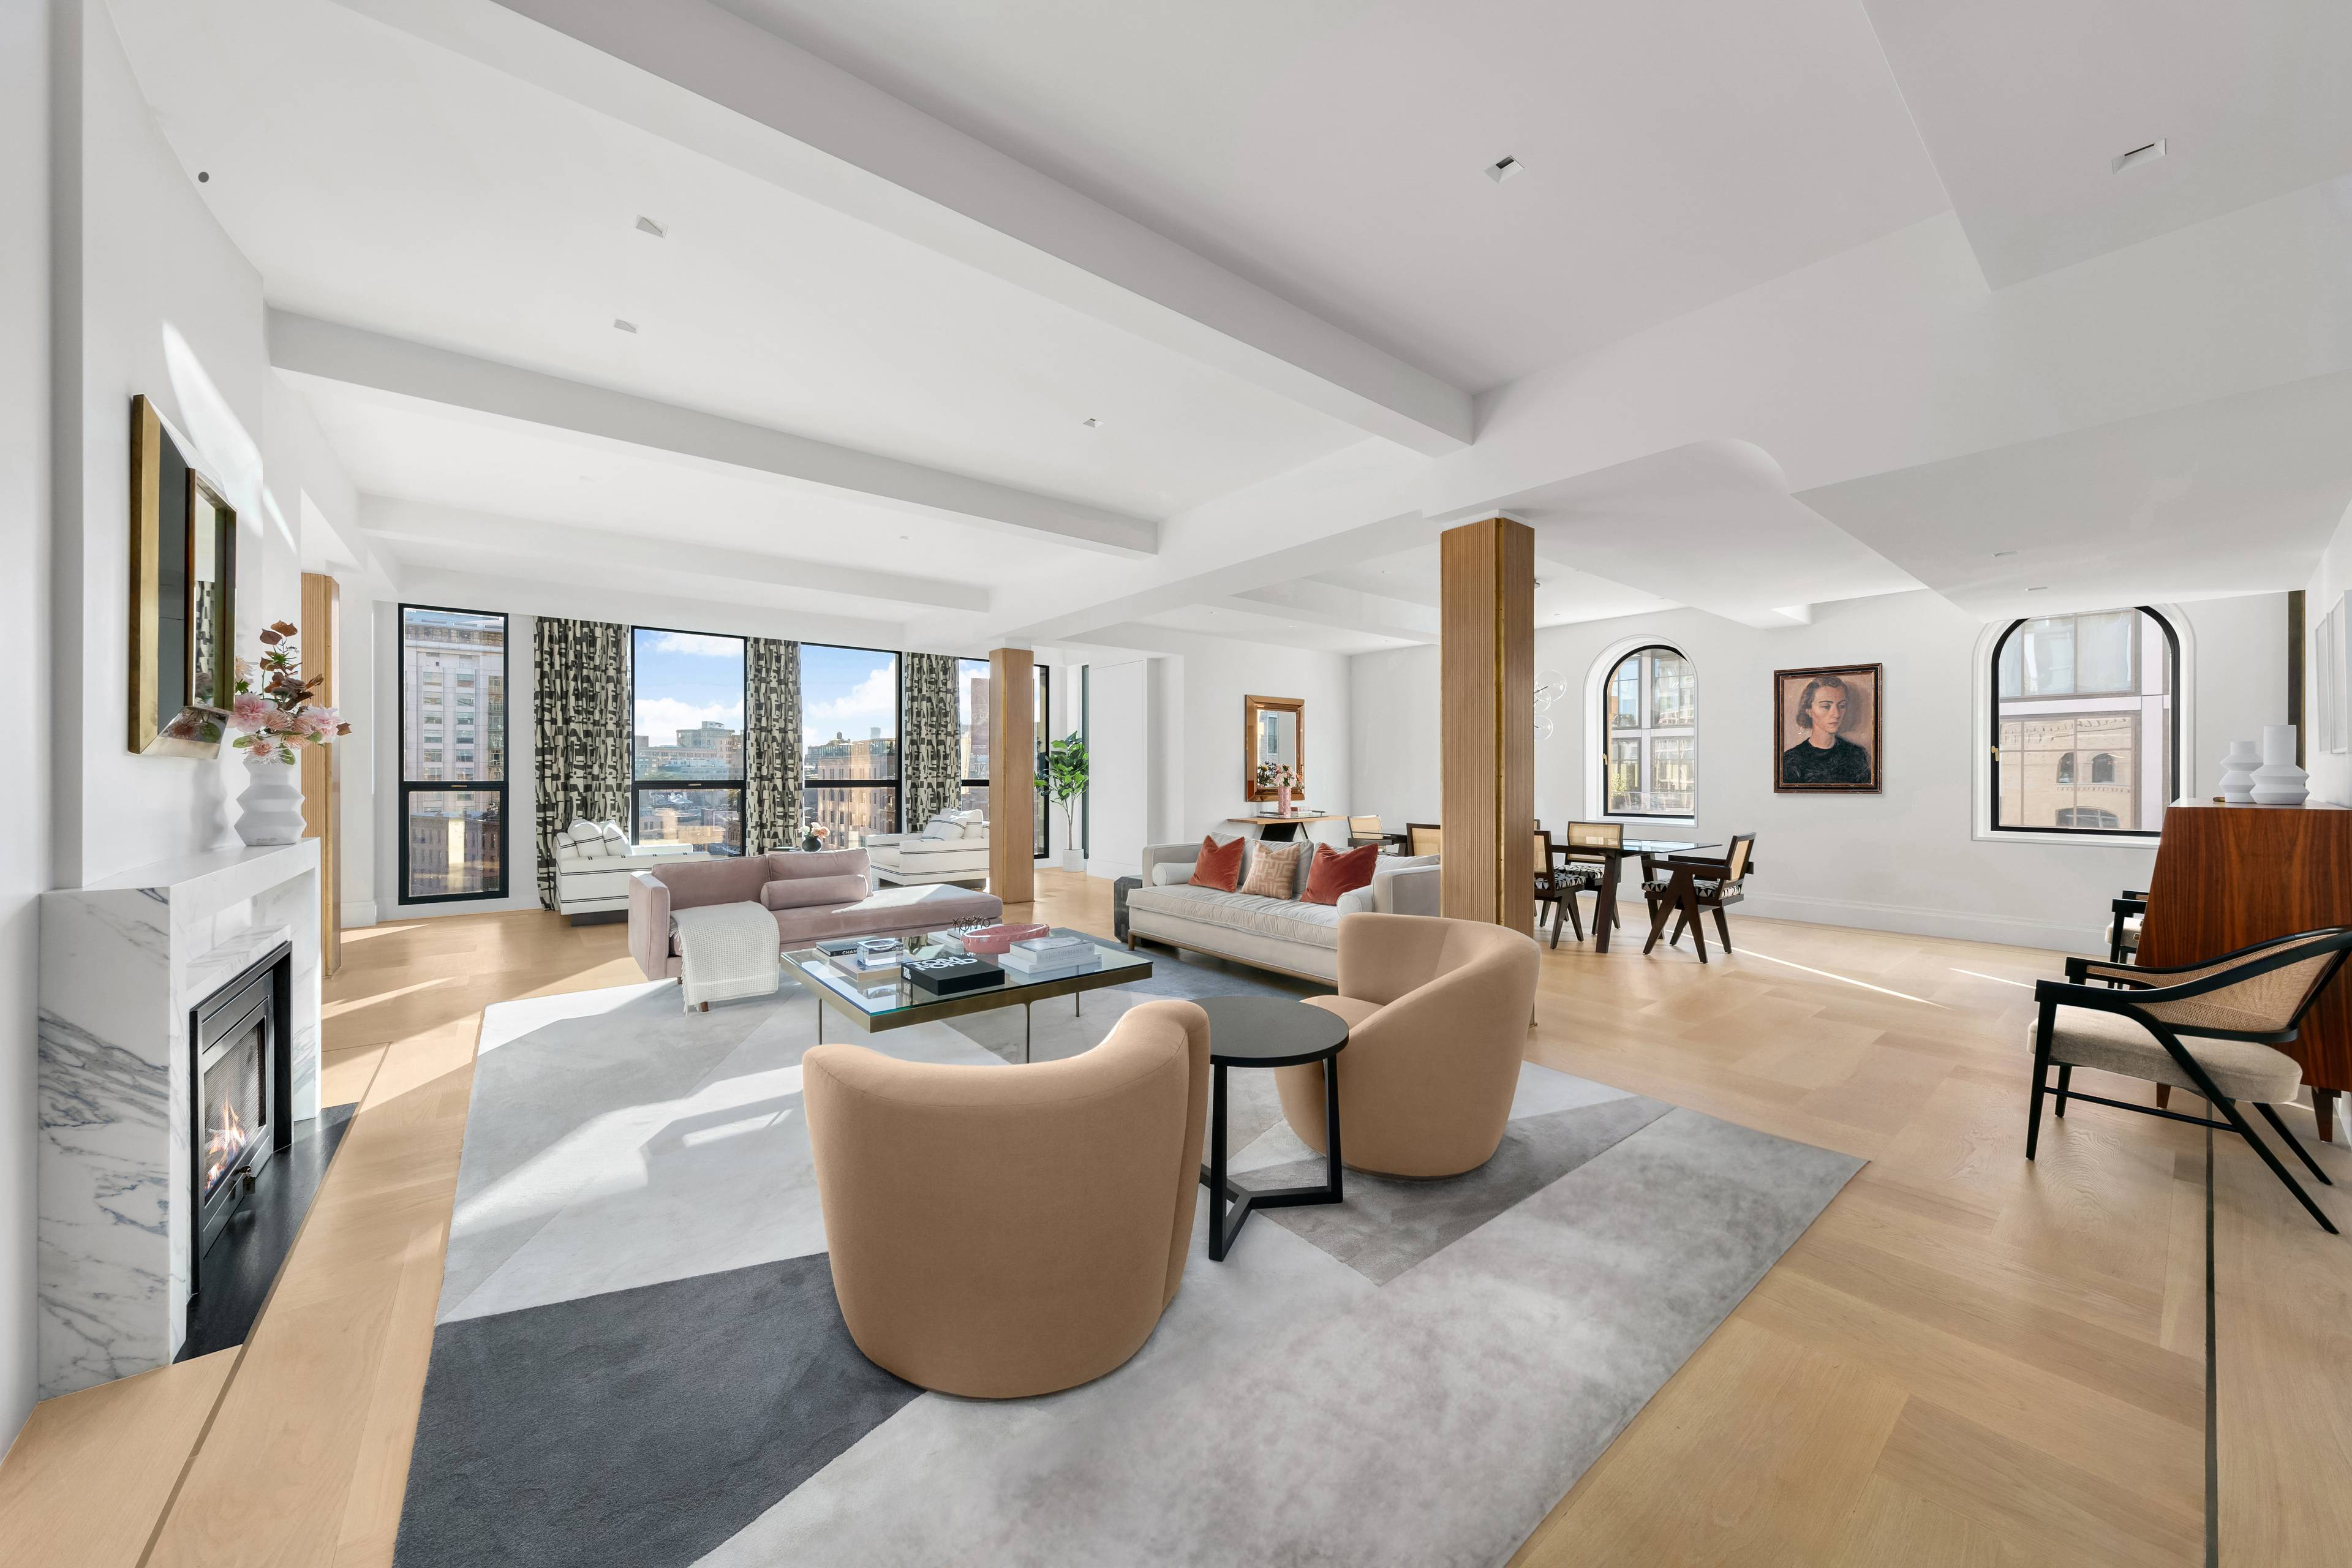 66 9th AVENUE | THE DREAM FULL FLOOR PRIVATE RESIDENCE | 5500SF